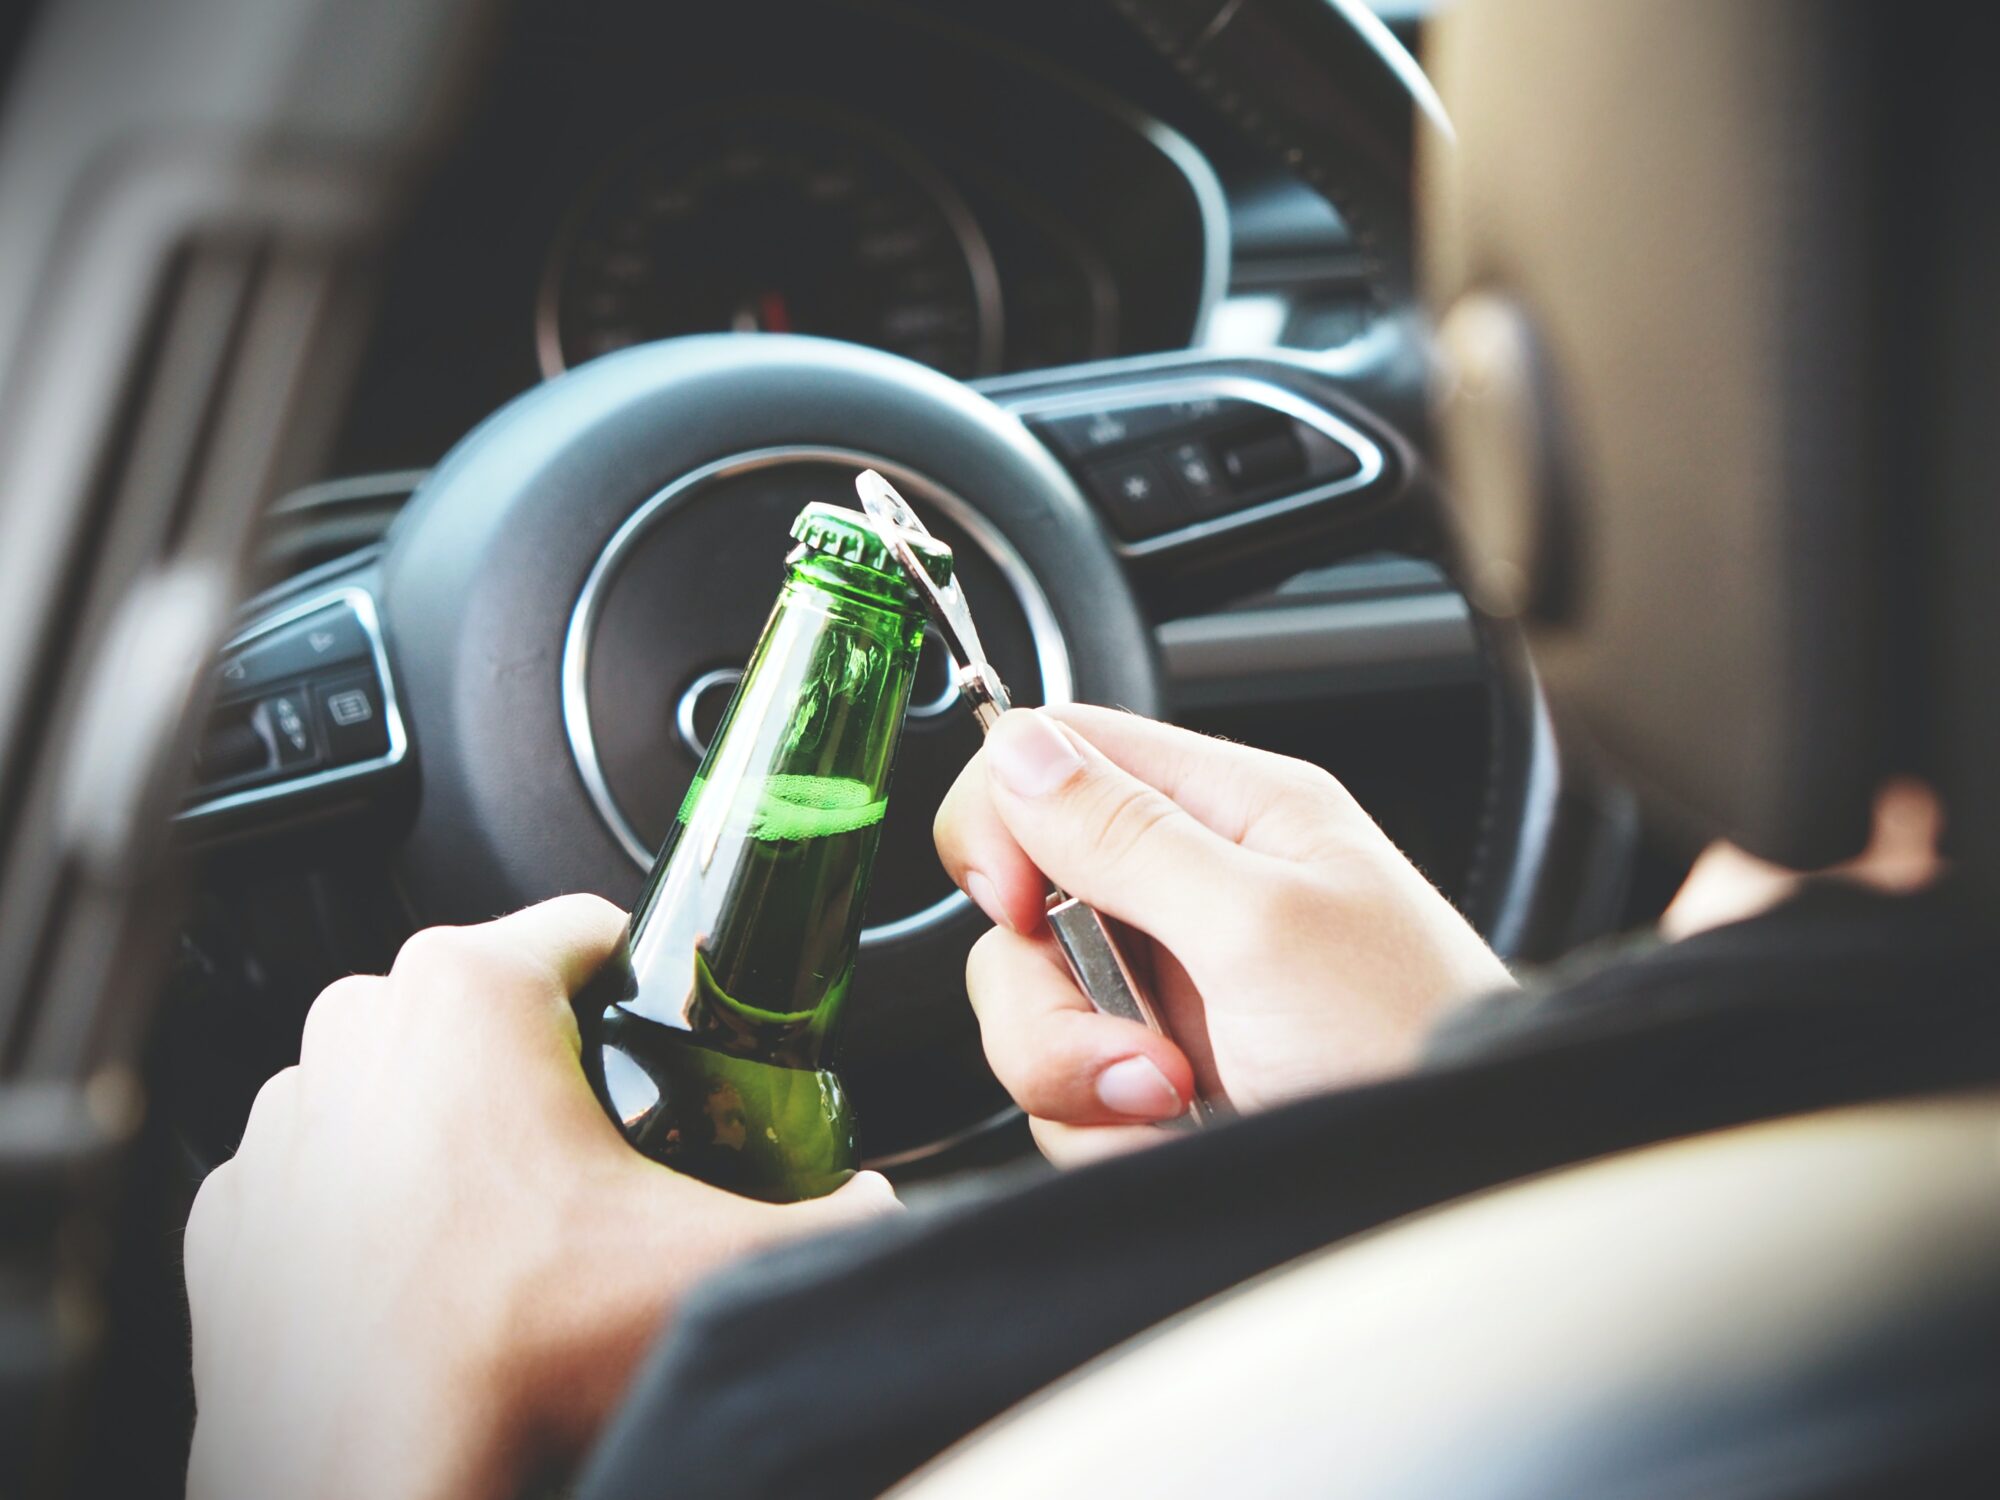 Driver holding a green bottle with a metallic opener attached to it, positioned near a car steering wheel, demonstrating drunk driving behavior.